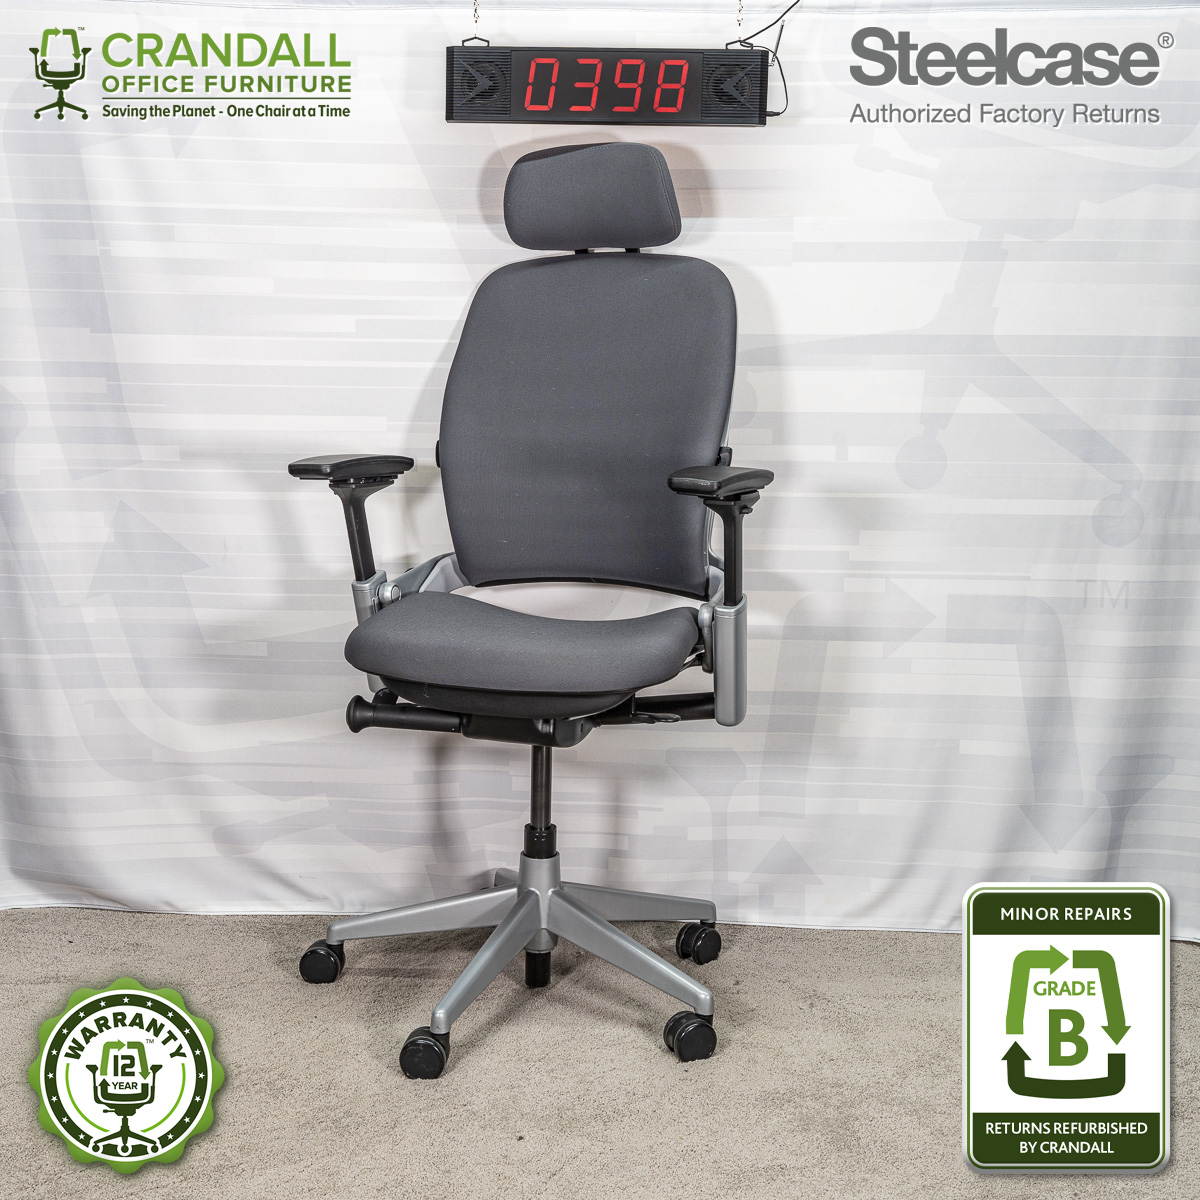 0398 Steelcase V2 Leap With Headrest Grade B Crandall Office Furniture